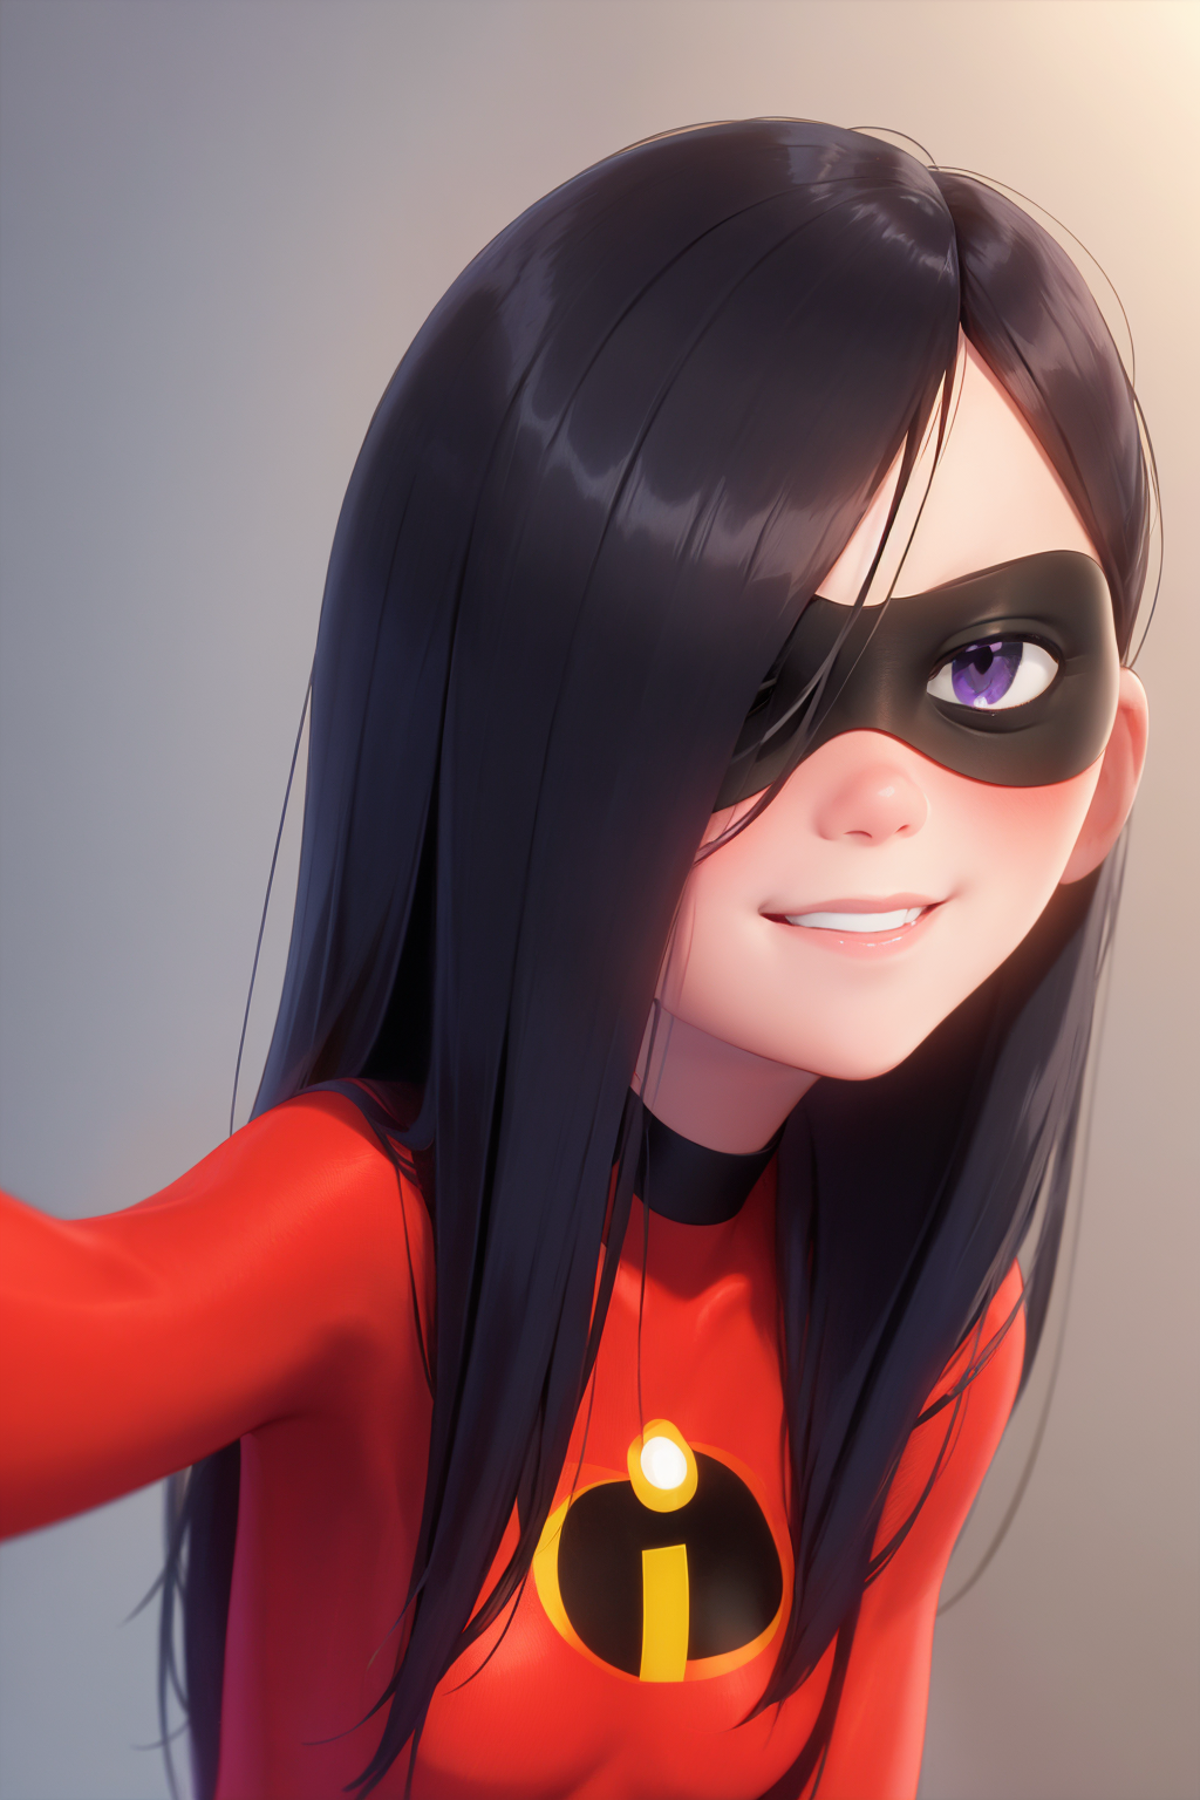 A cartoon drawing of a girl with dark hair and a red shirt, wearing a black mask and smiling.